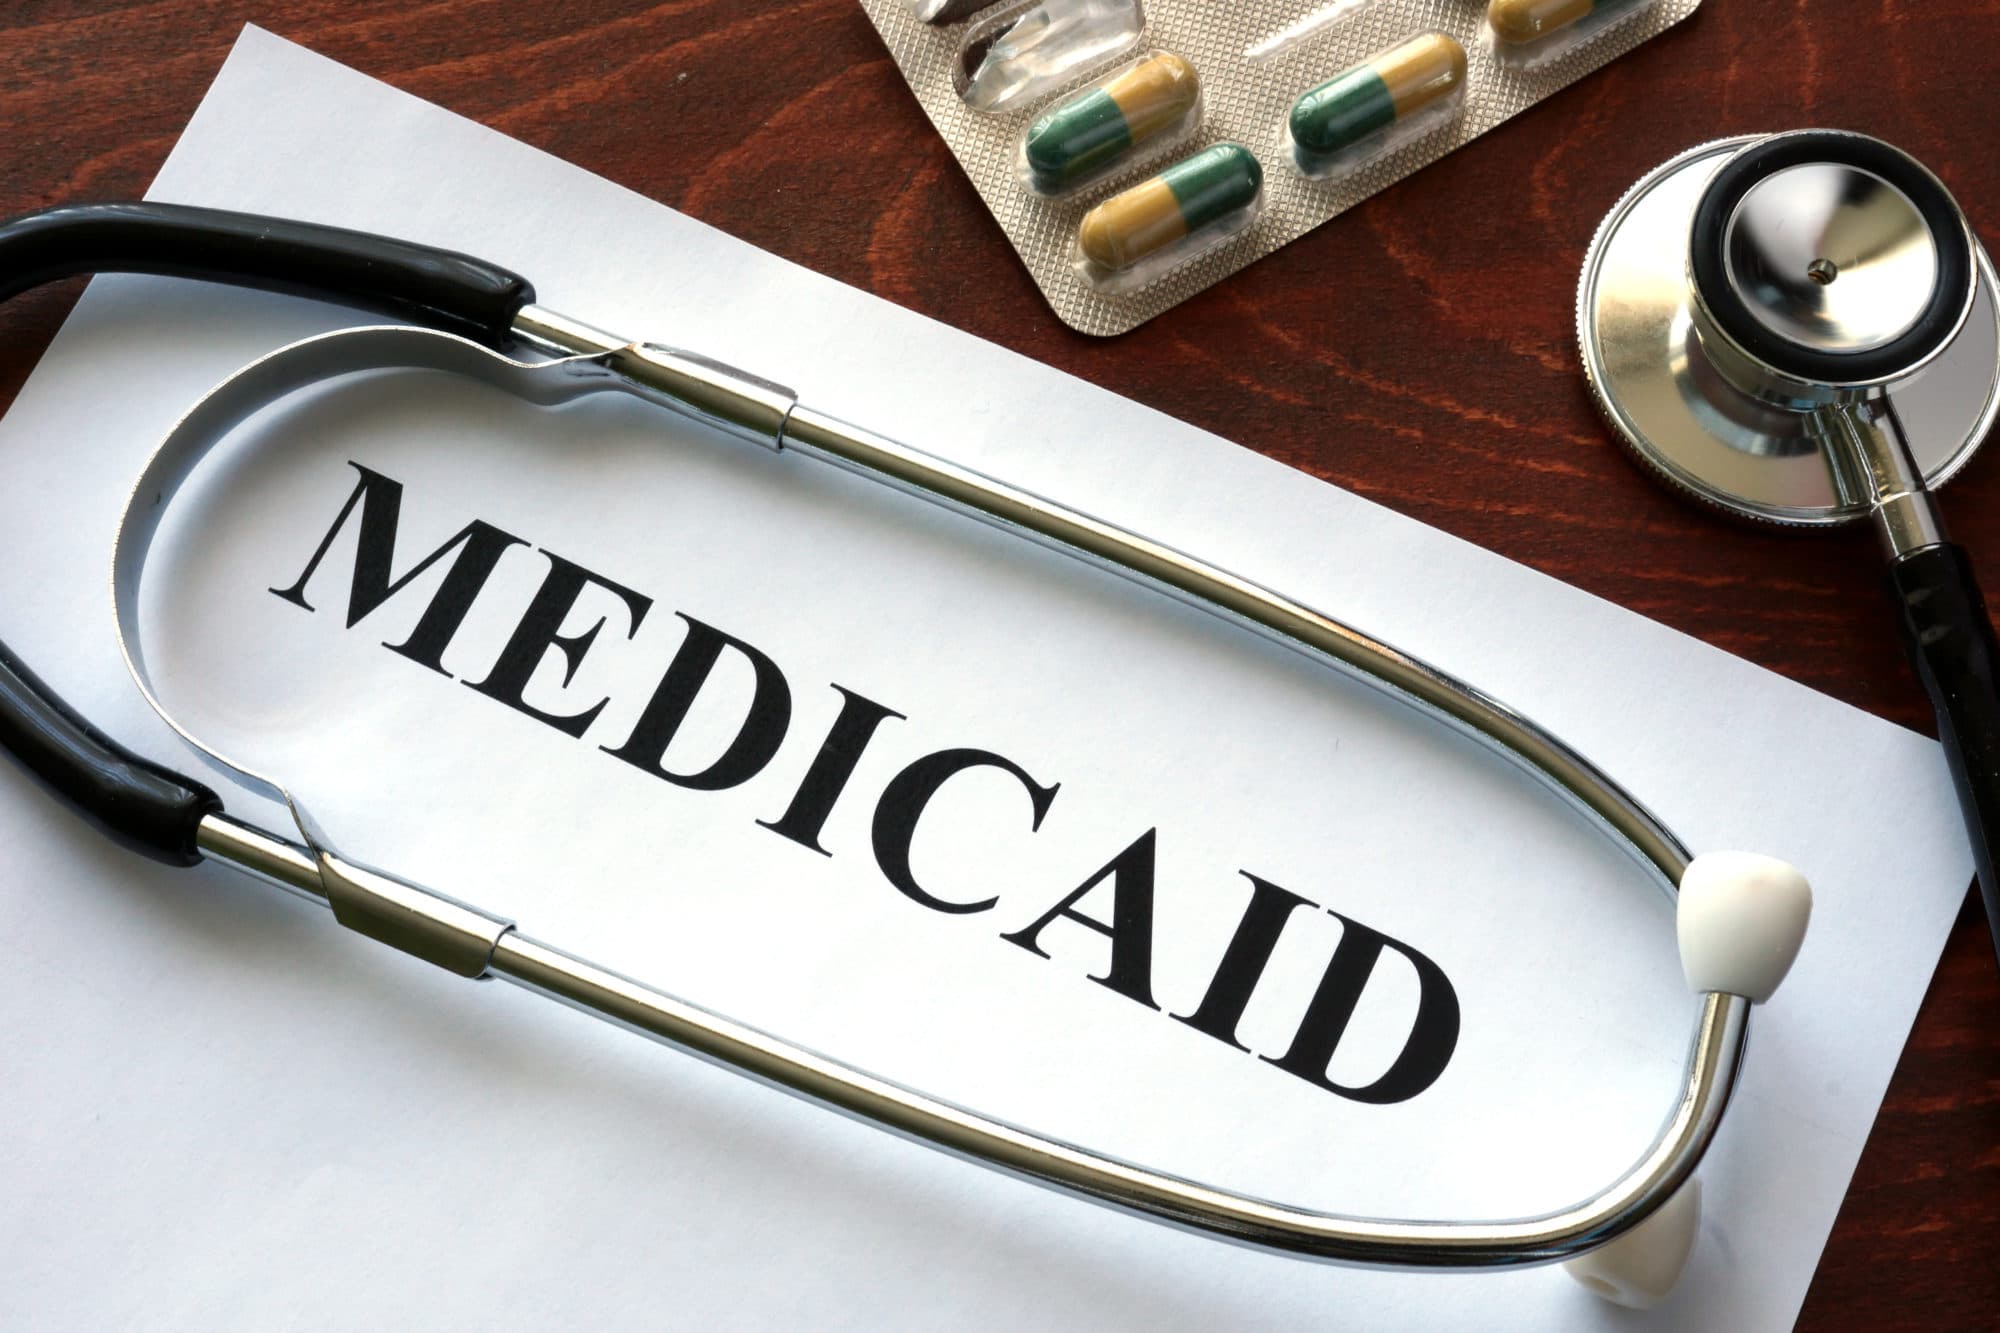 Medicaid Managed Care Organizations Face Scrutiny Over Prior Authorization Denials